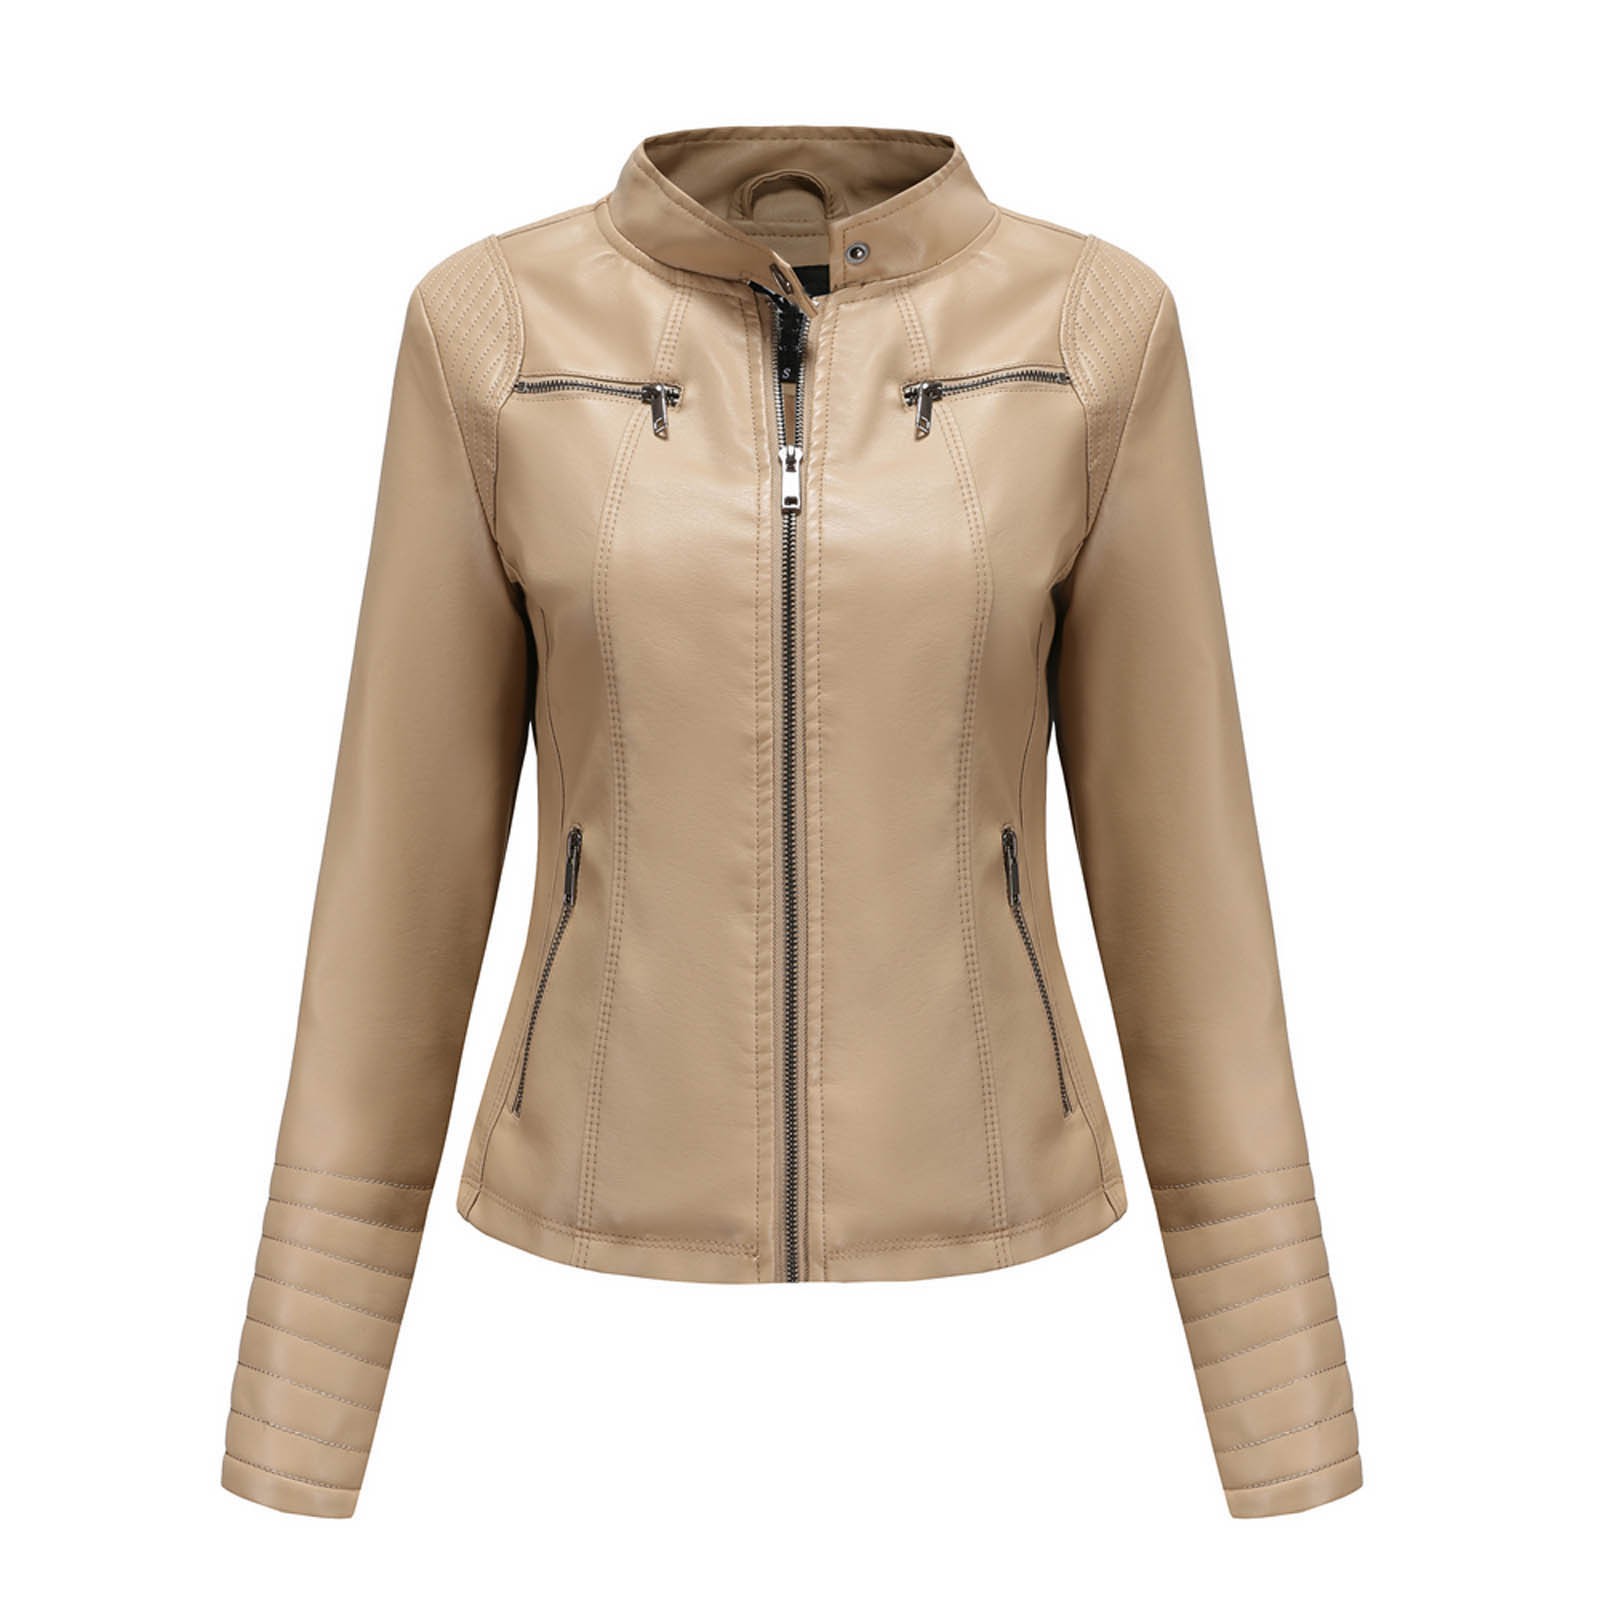 Tejiojio Coats Clearance Women's Slim-Fit Leather Stand-Up Collar Zipper Motorcycle Suit Thin Coat Jacket - image 2 of 7